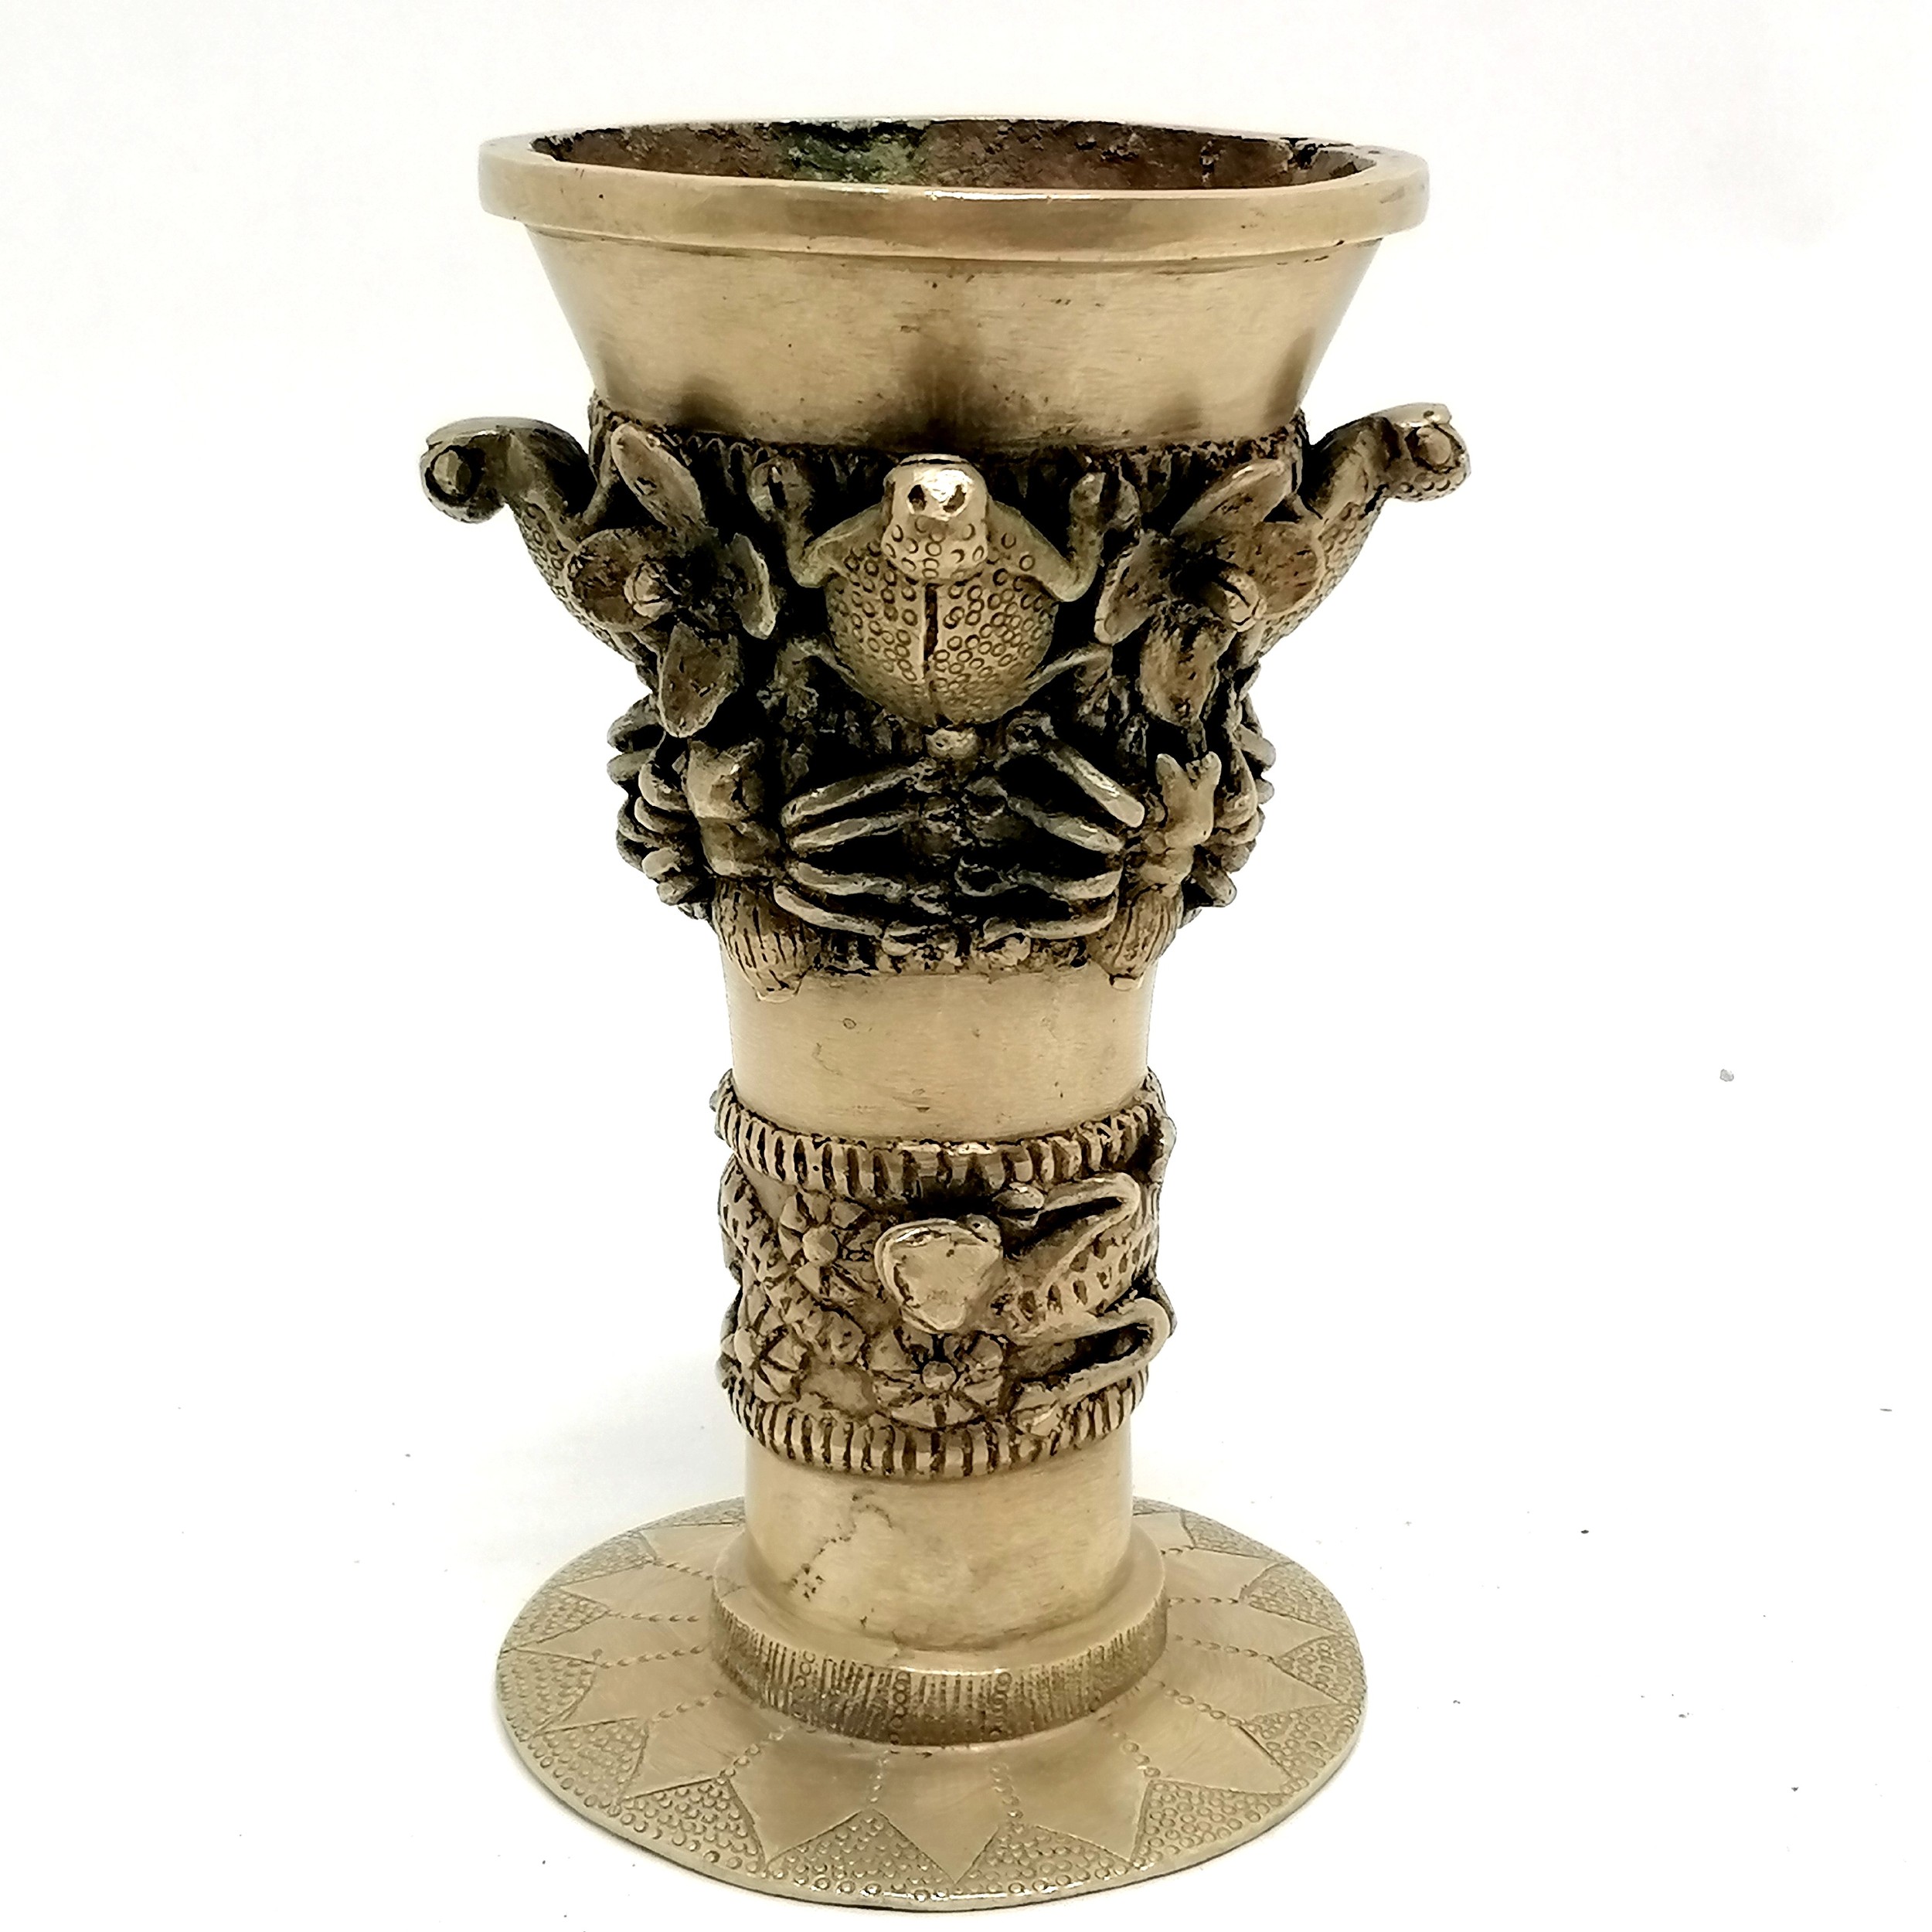 Unusual African bronze chalice with frog / spider / lizard detail in cast relief - 17cm high & 1361g